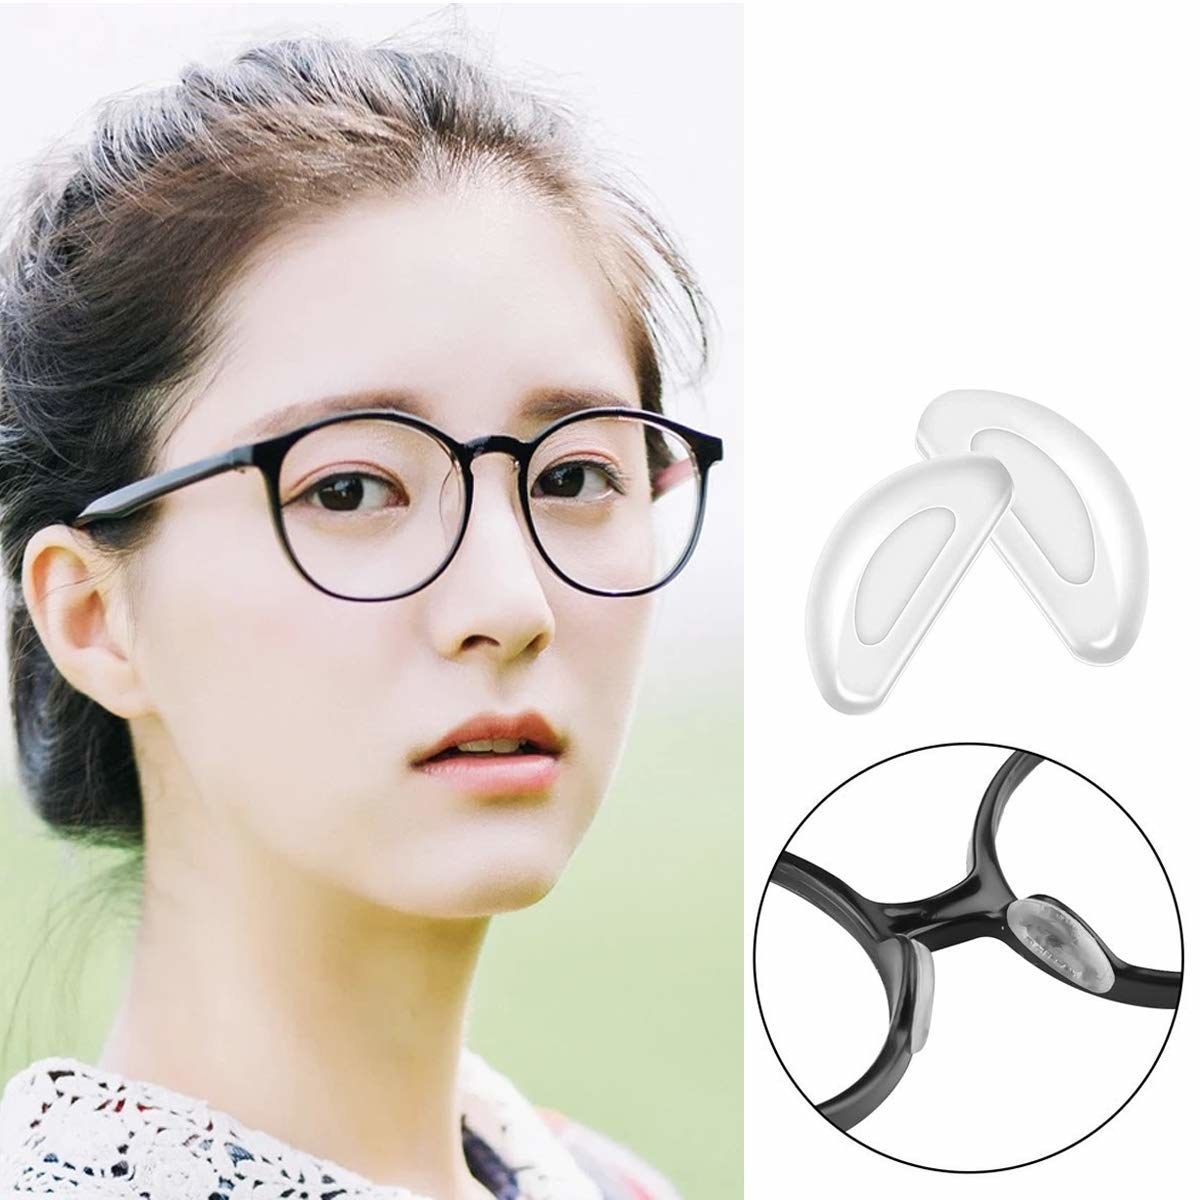 A person wears a pair of glasses with the nose pads in a bubble on the right